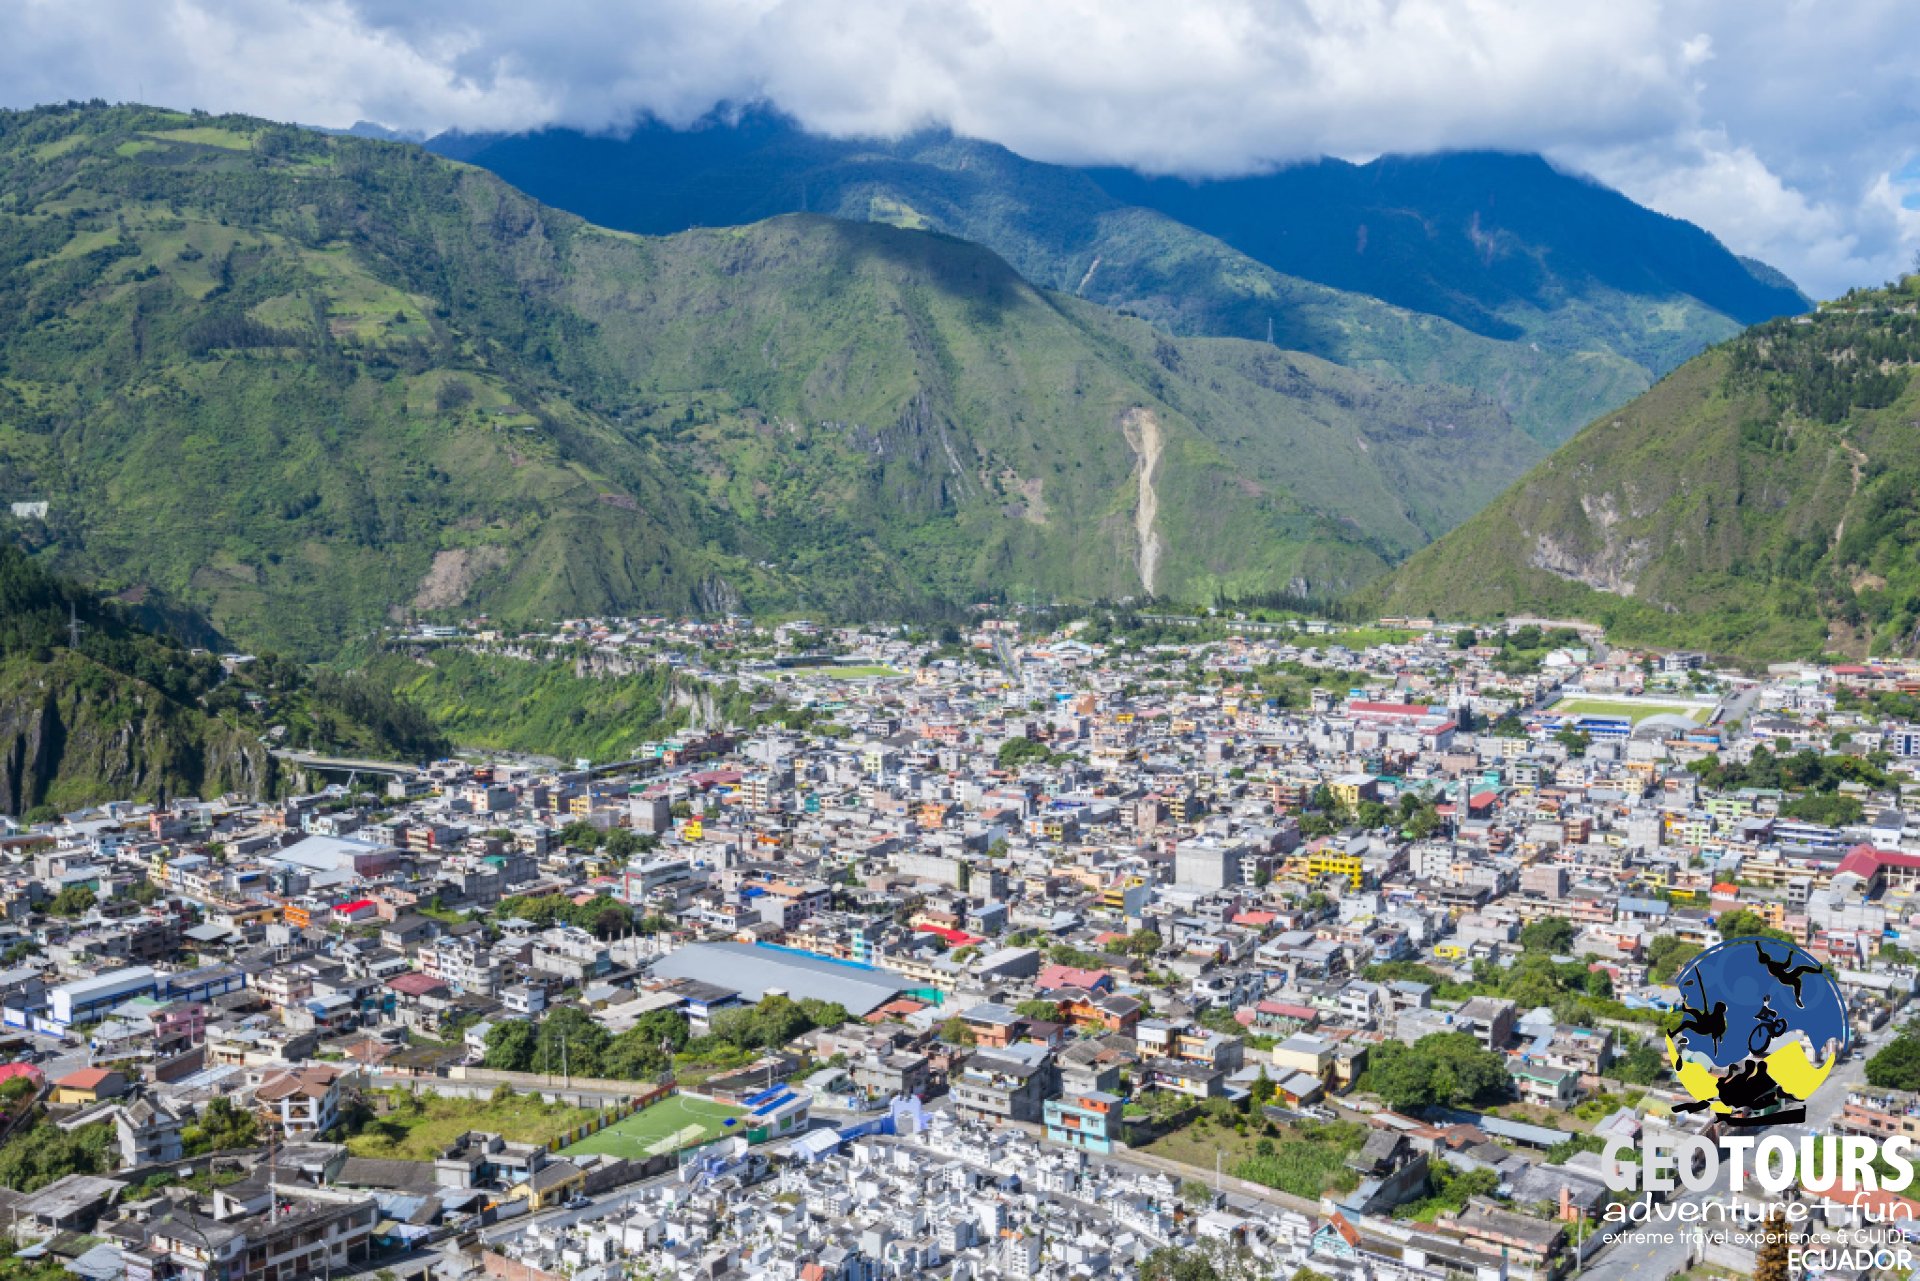  Foto Tourist viewpoints in the city of Baños